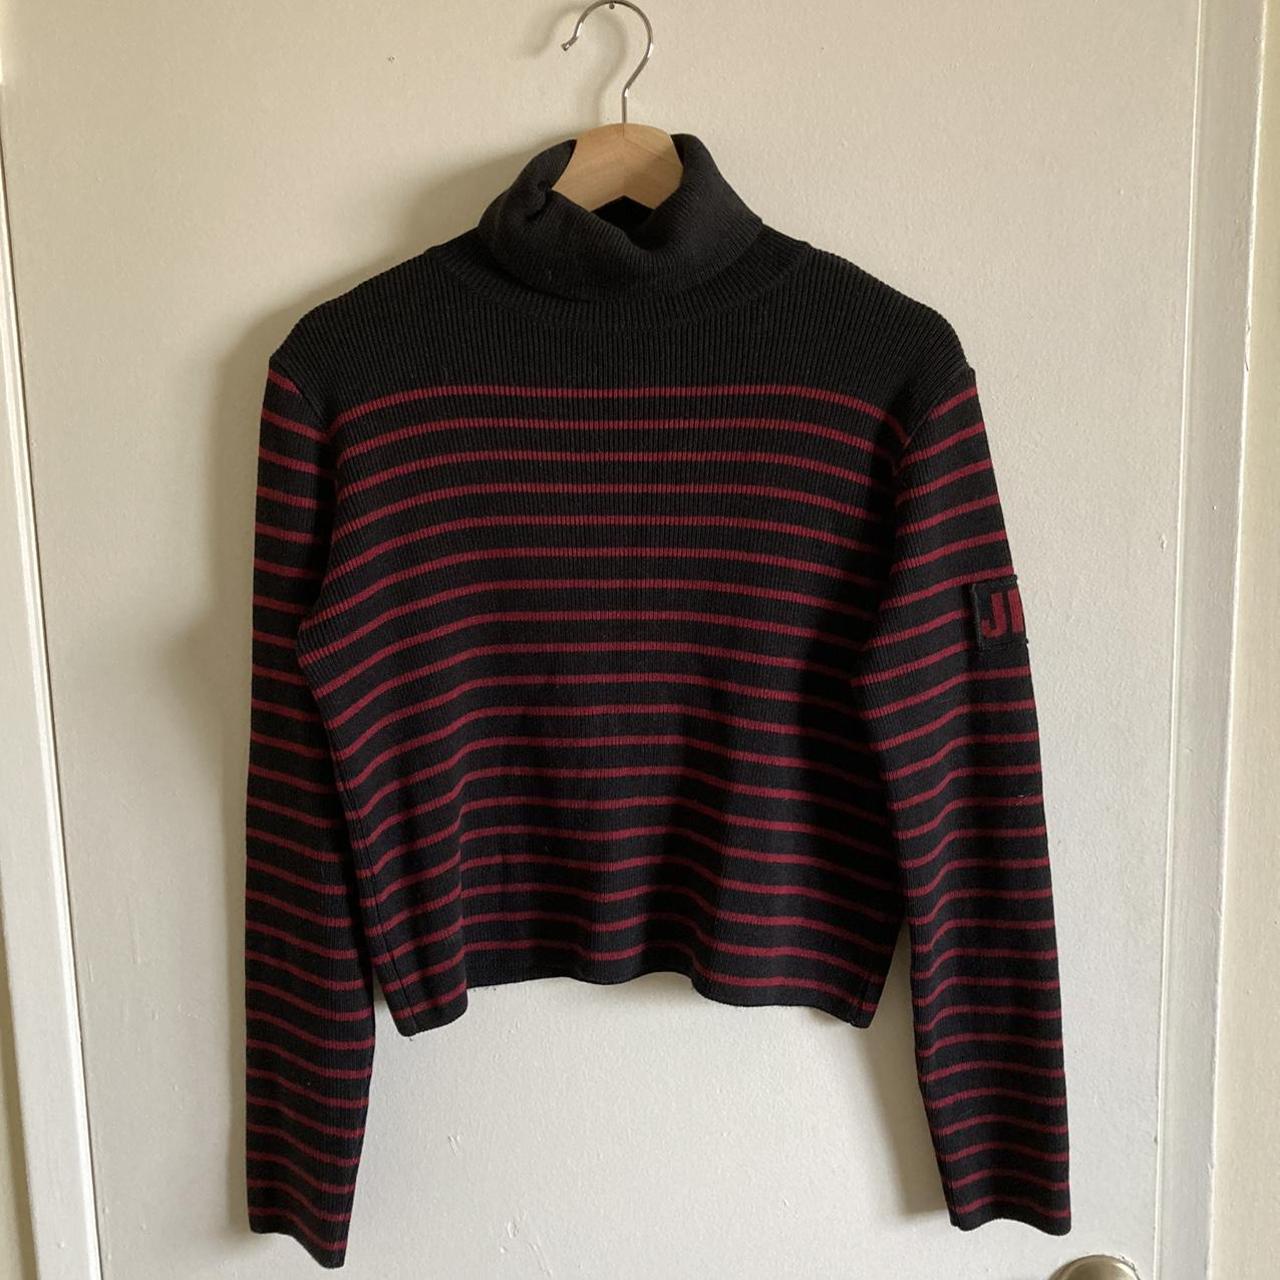 Gaultier Jeans Women's Black and Red Jumper